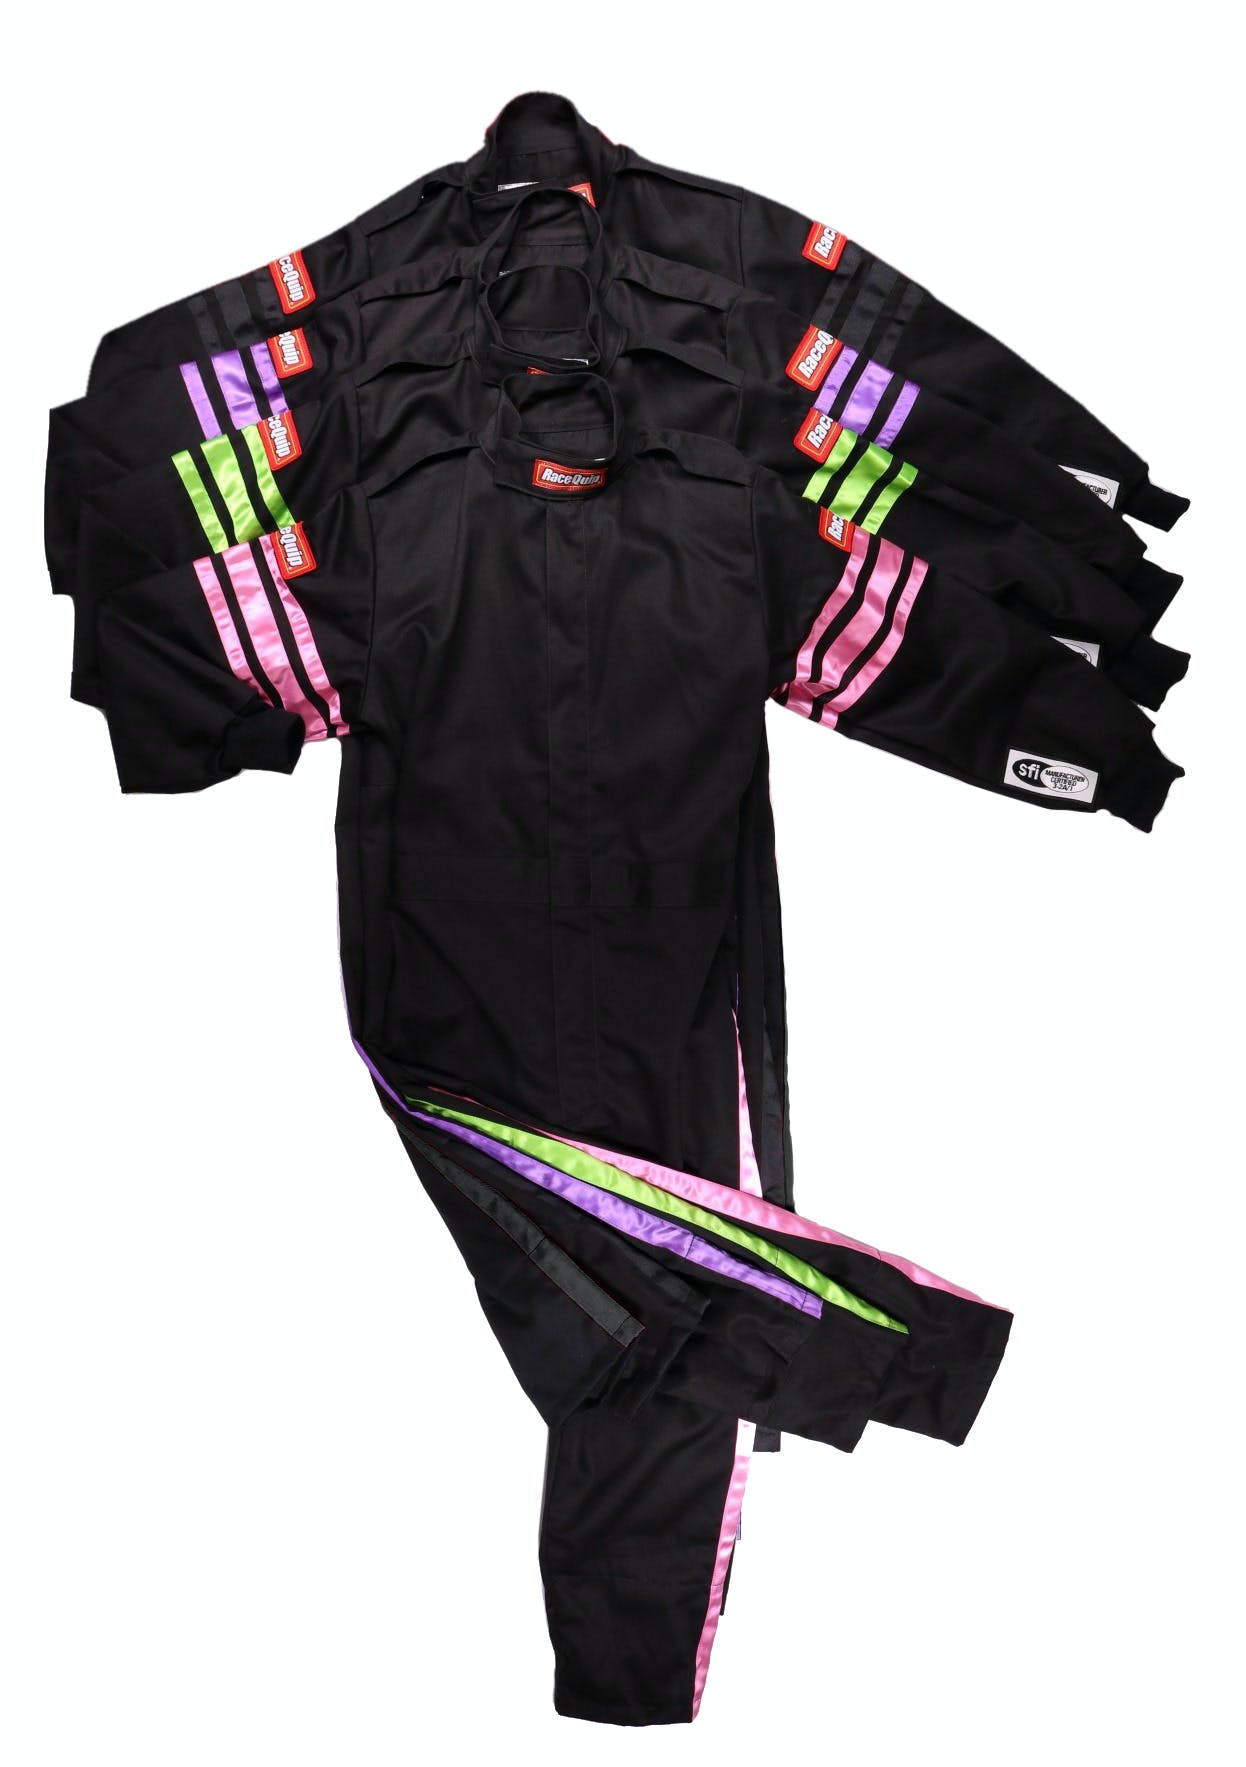 RaceQuip 1959992 SFI-1 Pyrovatex One-Piece Single-Layer Youth Racing Fire Suit (Black/Blue-S)